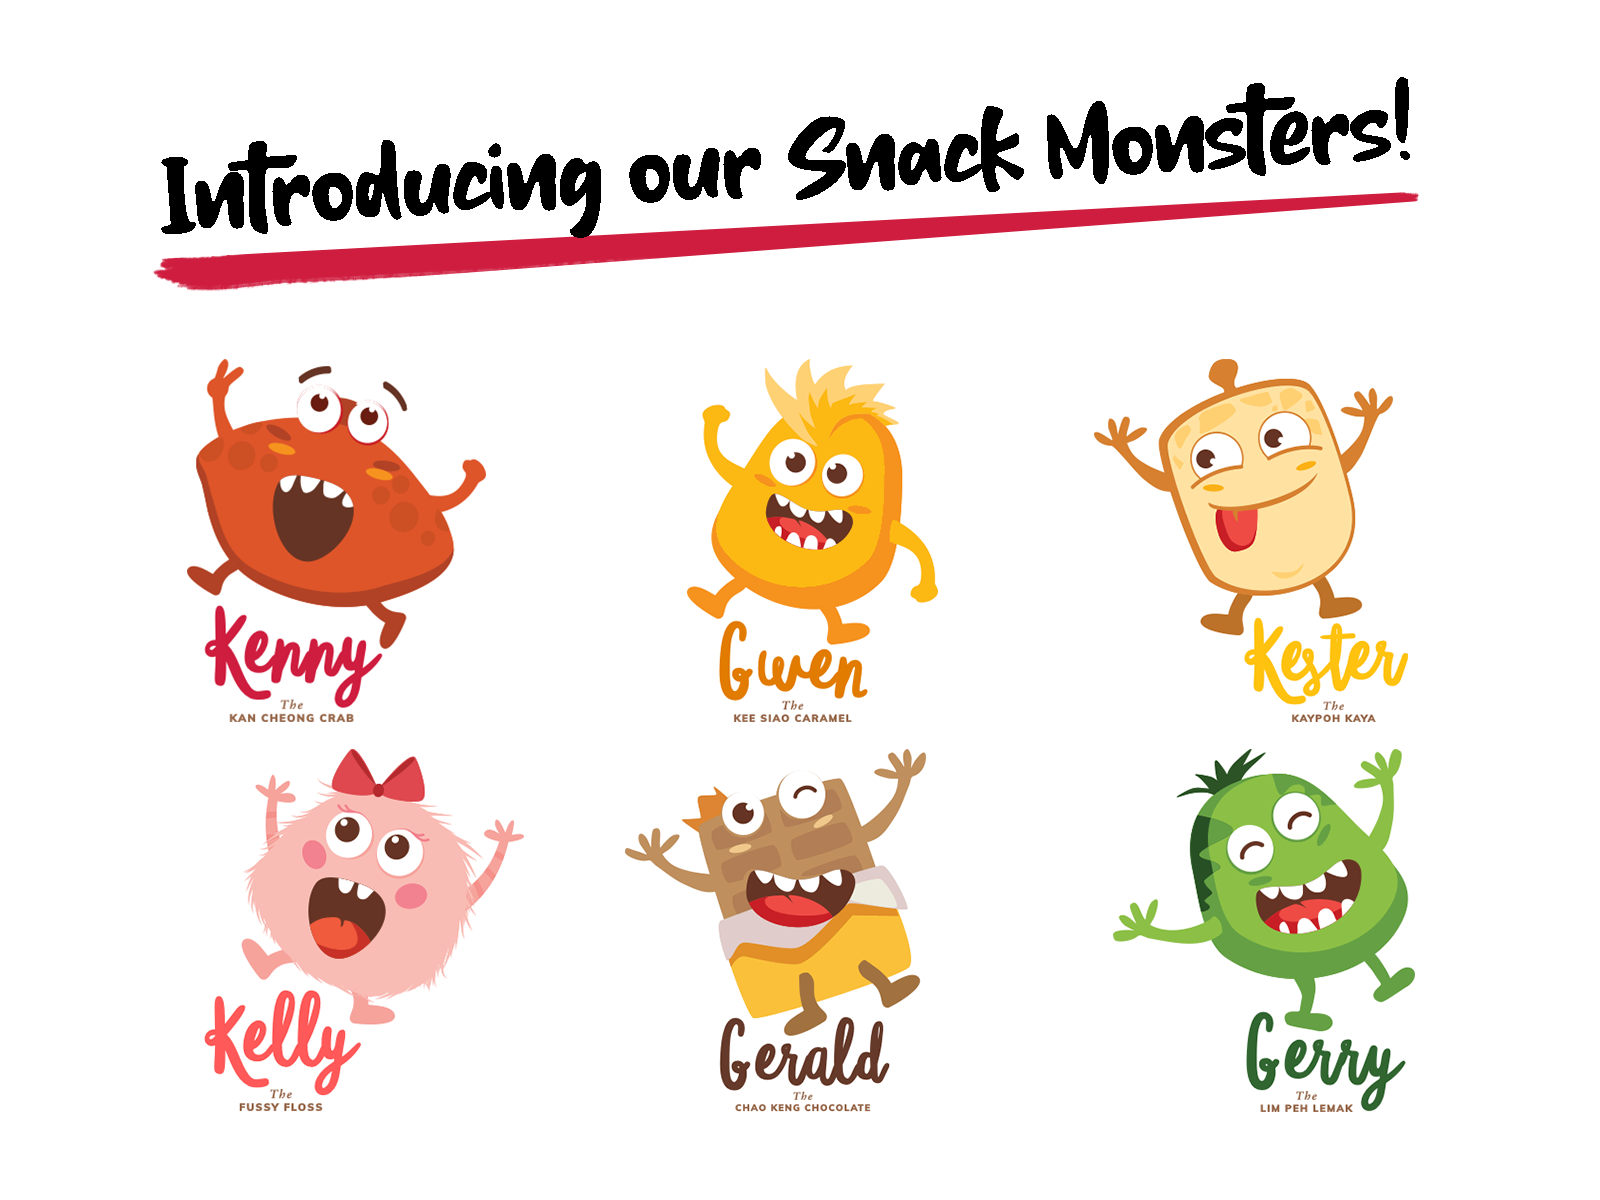 Meet our Snack Monsters!